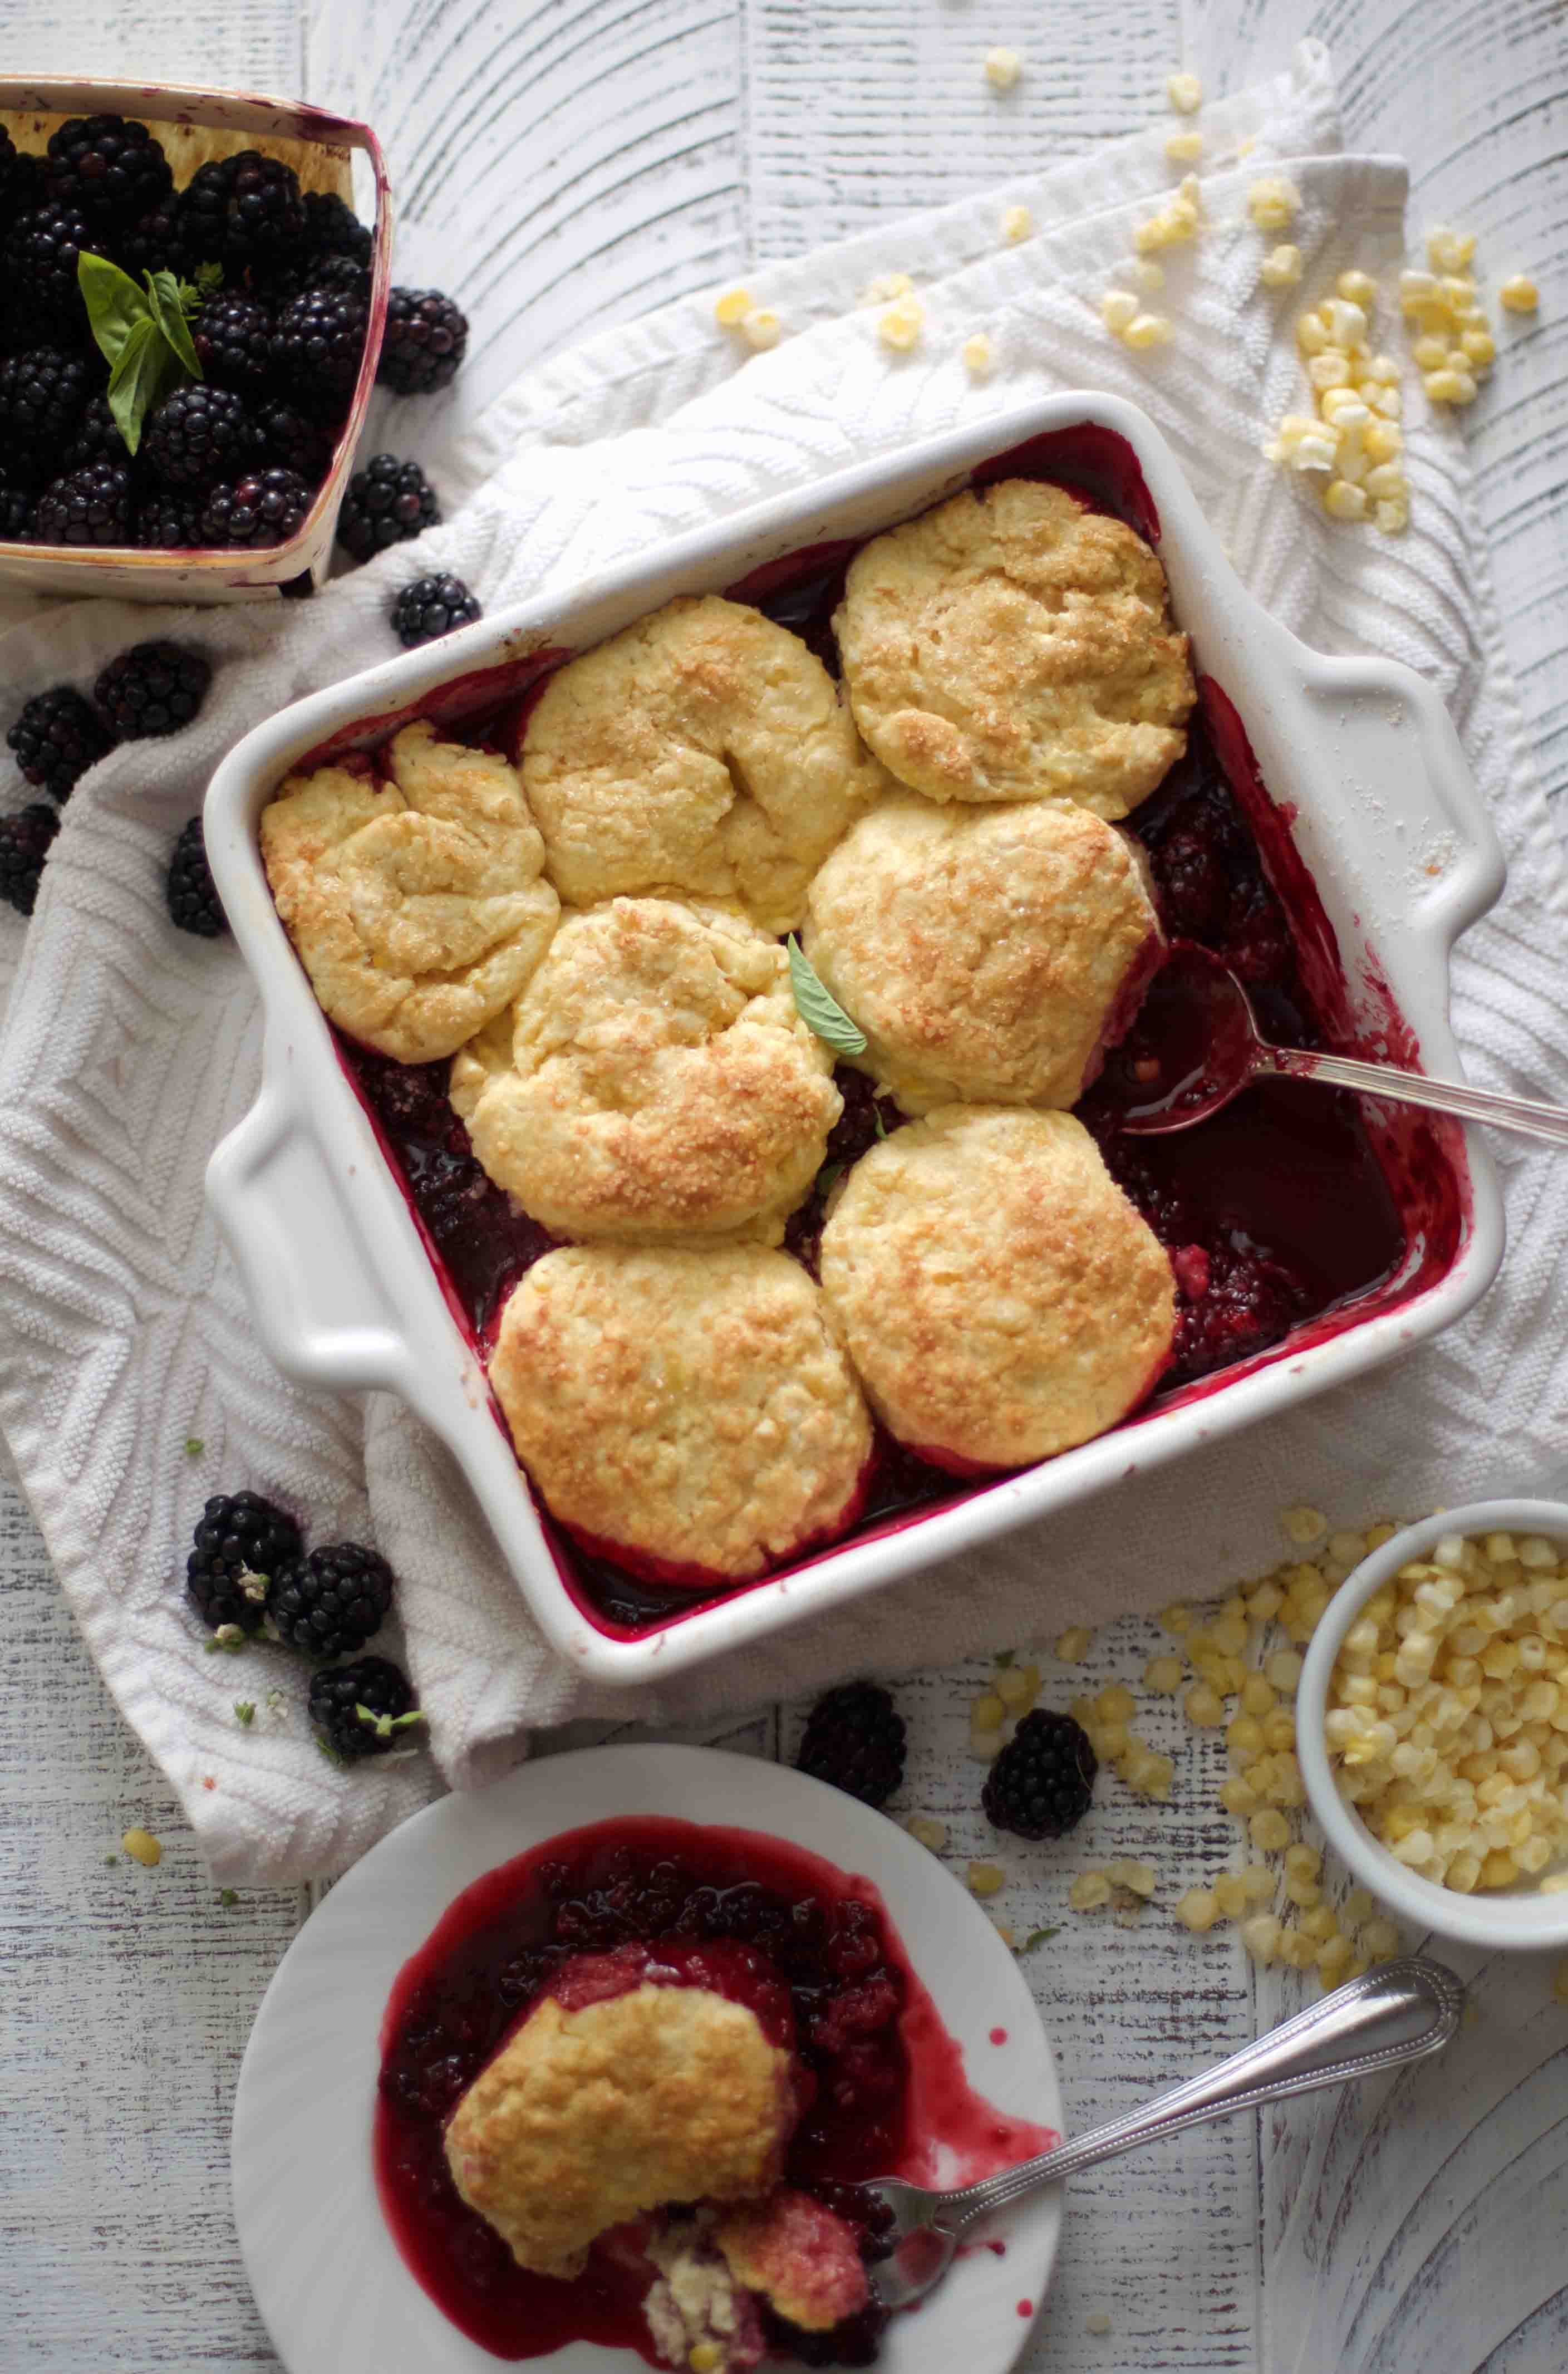 Blackberry Cobbler with Sweet Corn Biscuits - The Baker Chick